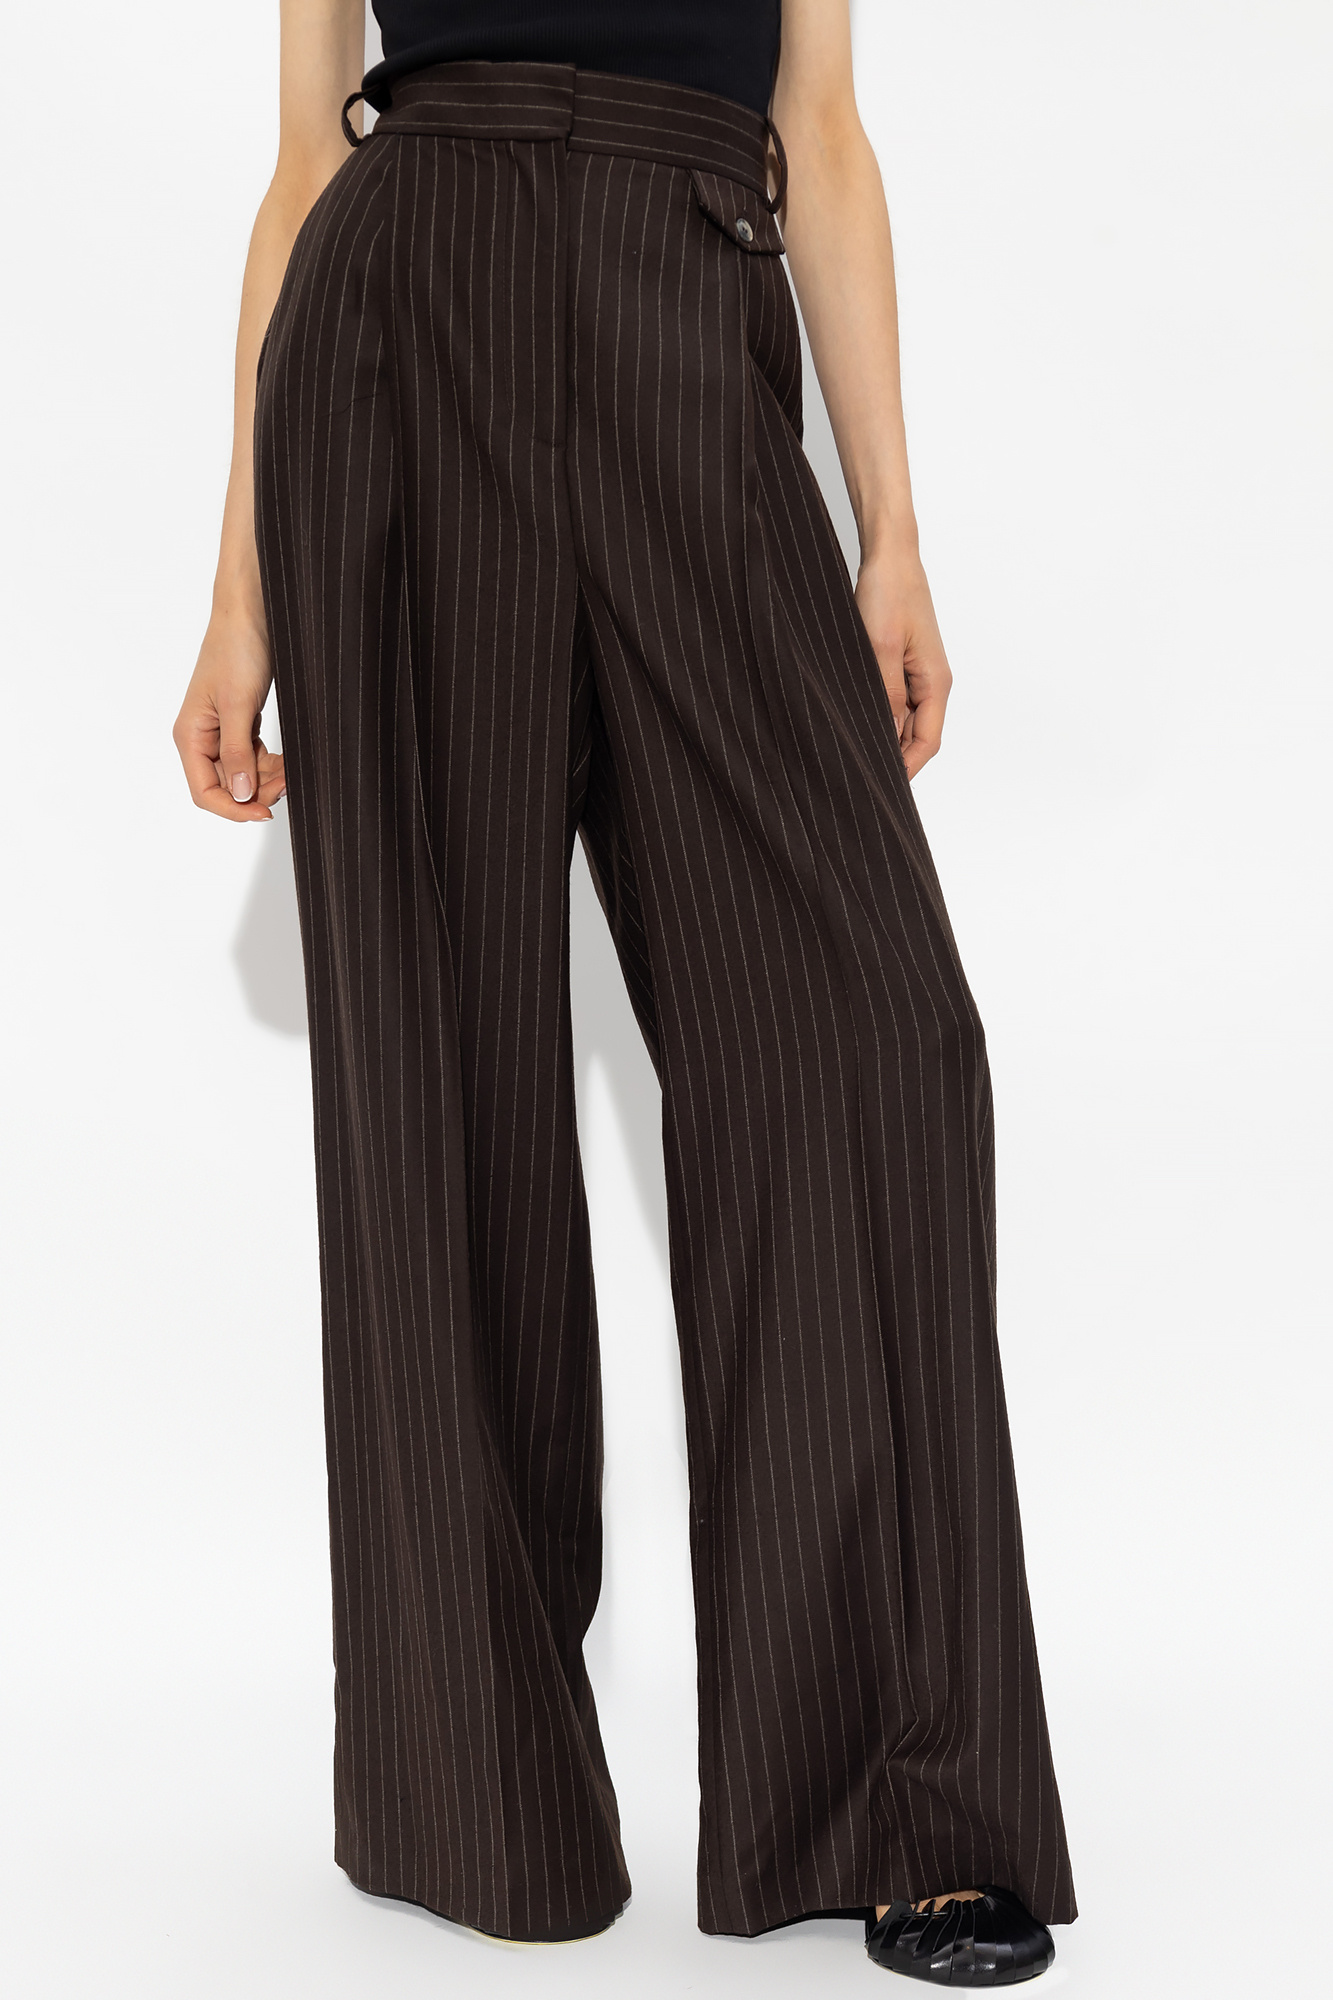 The Mannei ‘Jafr’ pleat-front black trousers